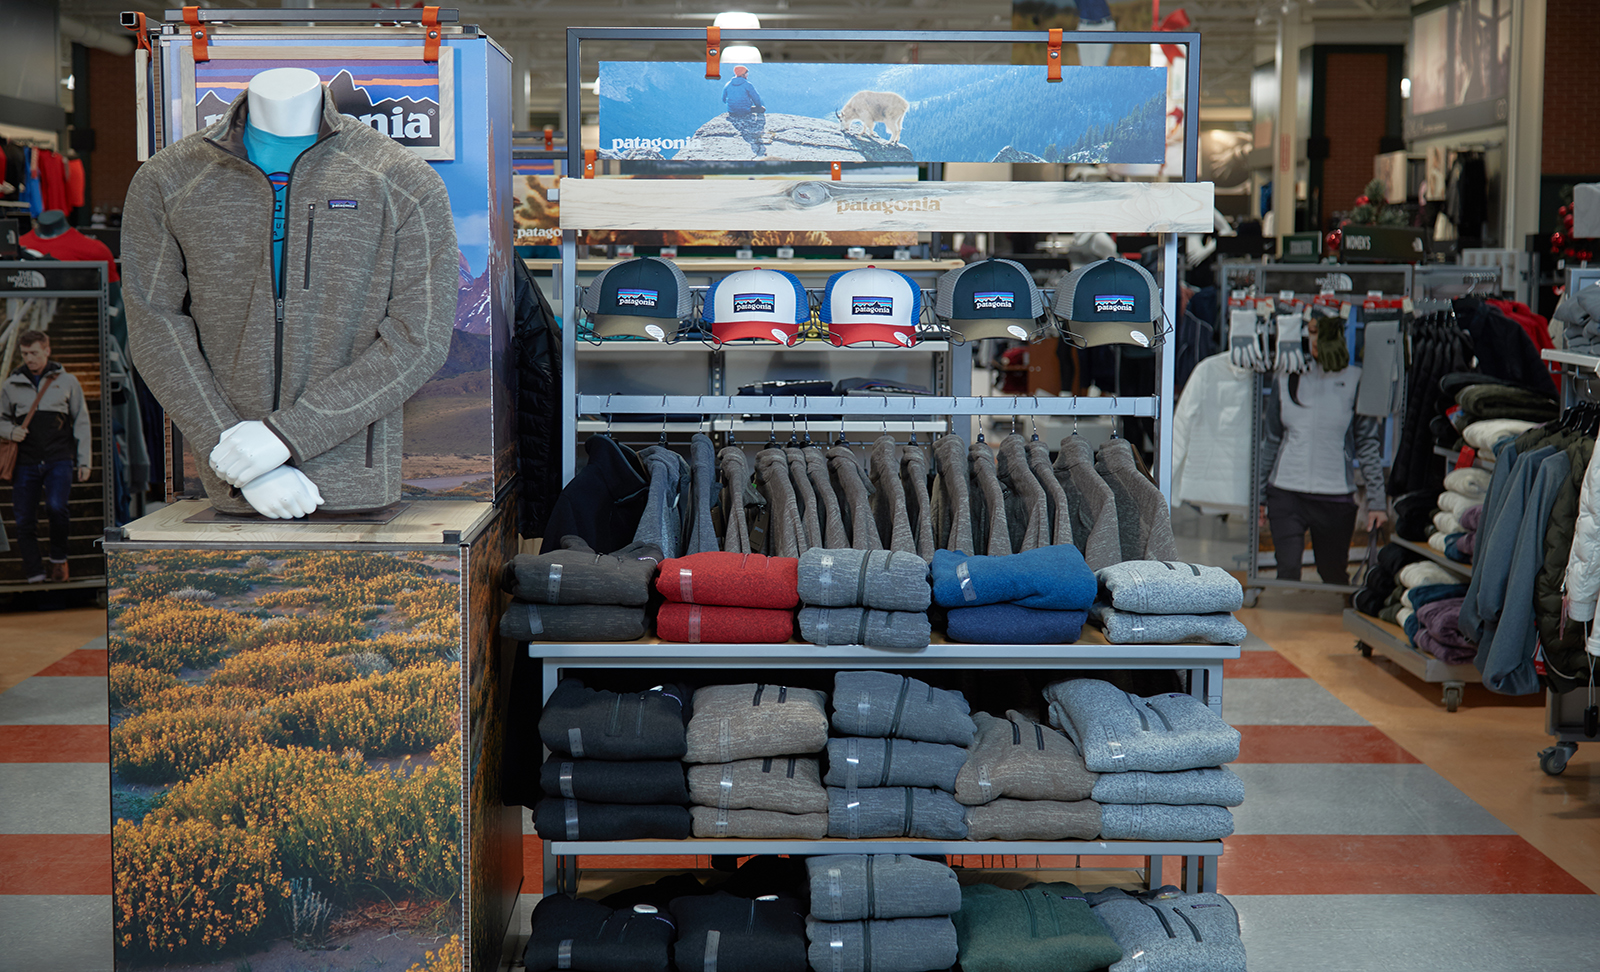 A final in-store view of the Patagonia display The Bernard Group designed to increase product count without increasing footprint.